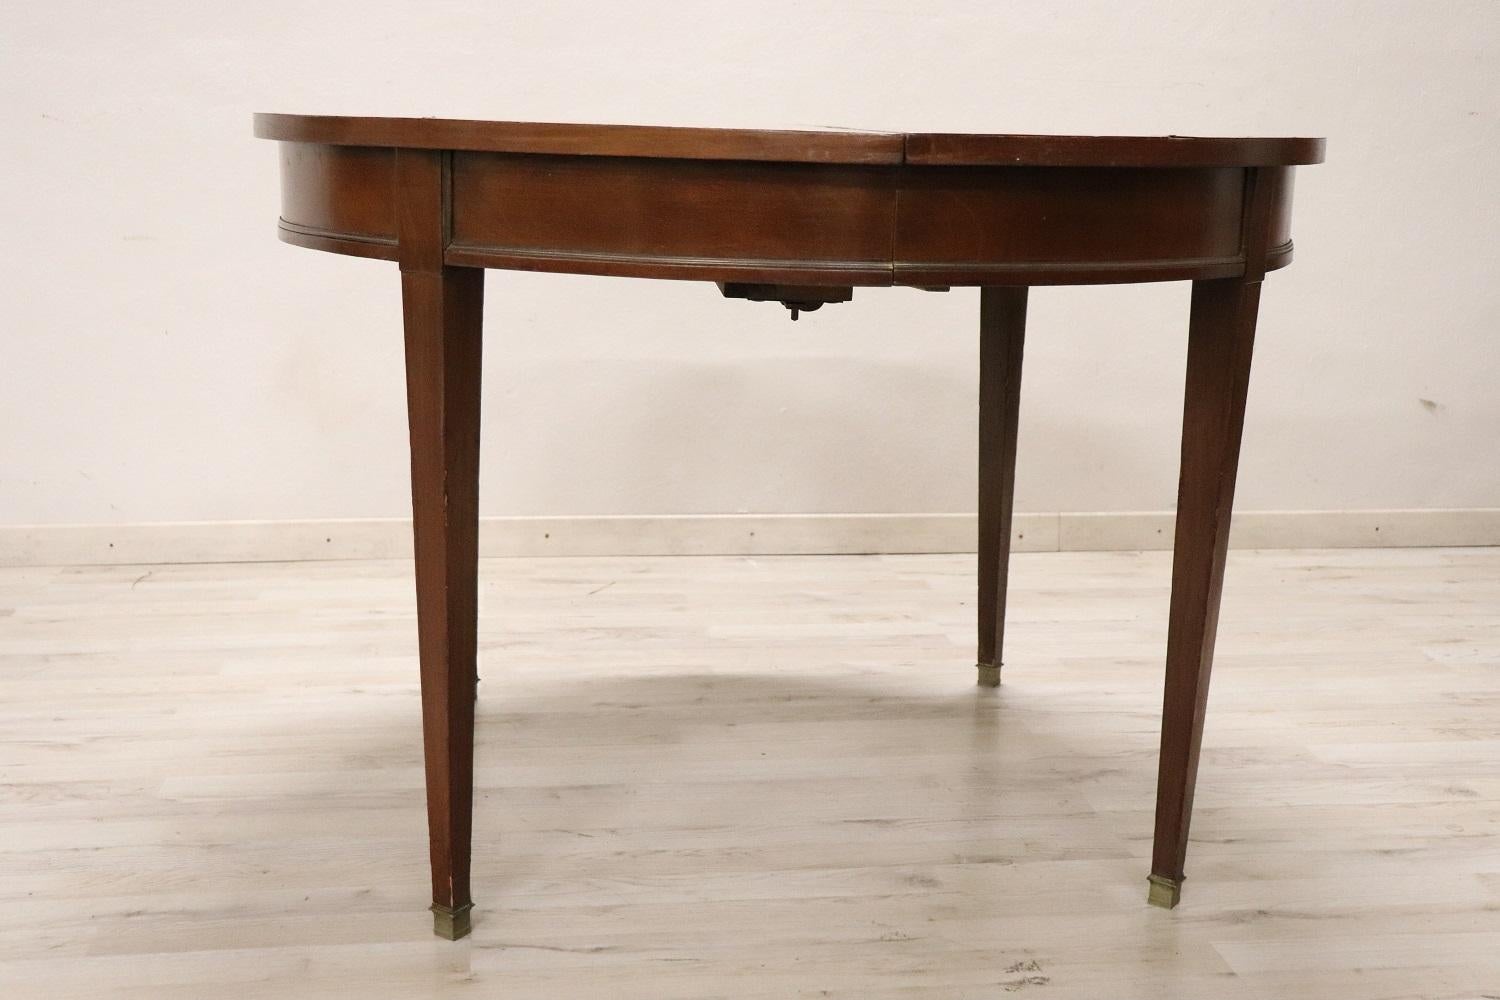 Beautiful important round dining room table, 1930s in solid walnut wood. This table is perfect for a dining room, it extends into the center becoming a large table that can accommodate many people. The four legs are elegant and slender in Louis XVI